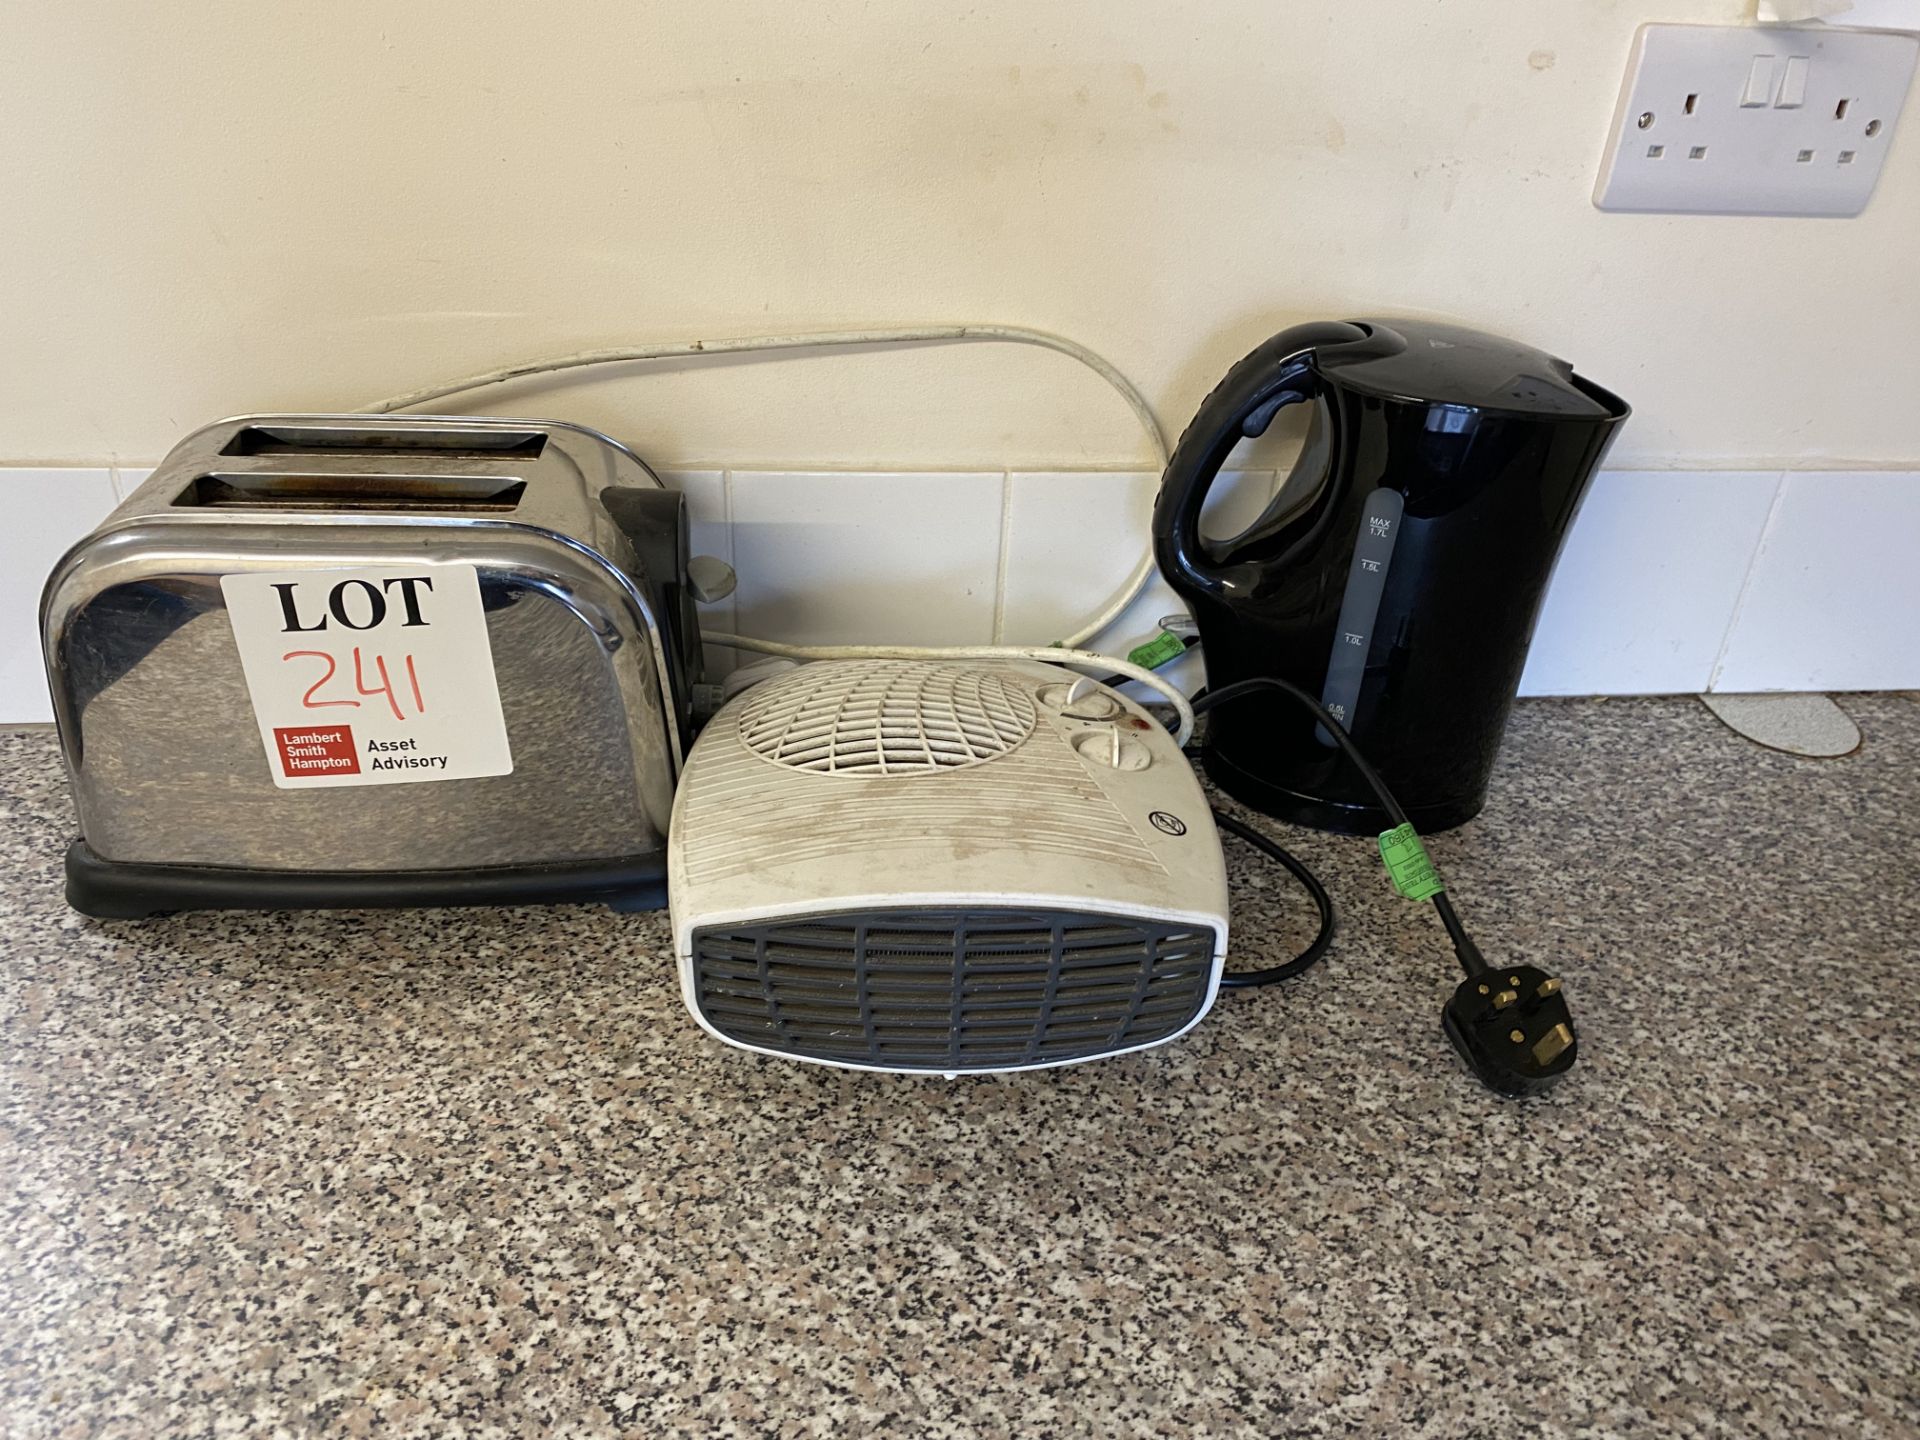 Toaster, one kettle, one electric heater